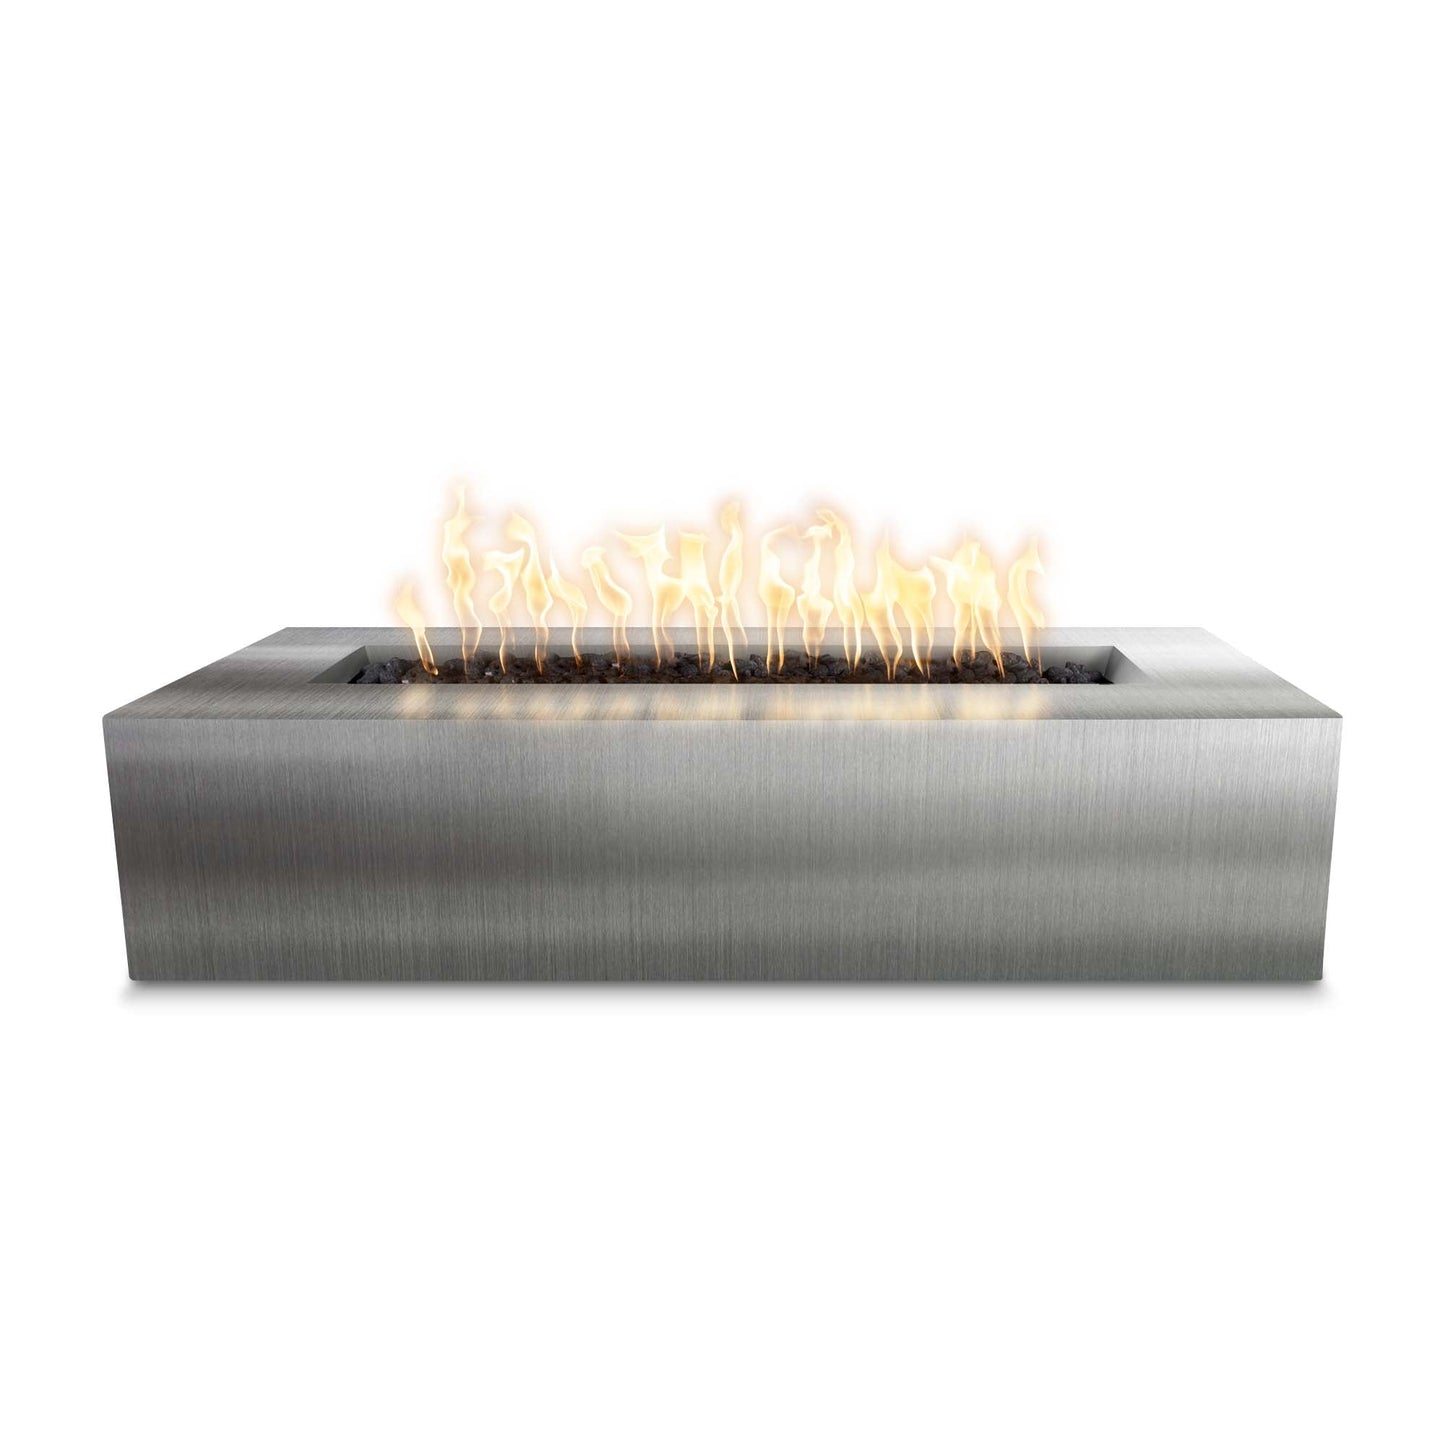 The Outdoor Plus Rectangular Regal 48" Corten Steel Liquid Propane Fire Pit with 12V Electronic Ignition